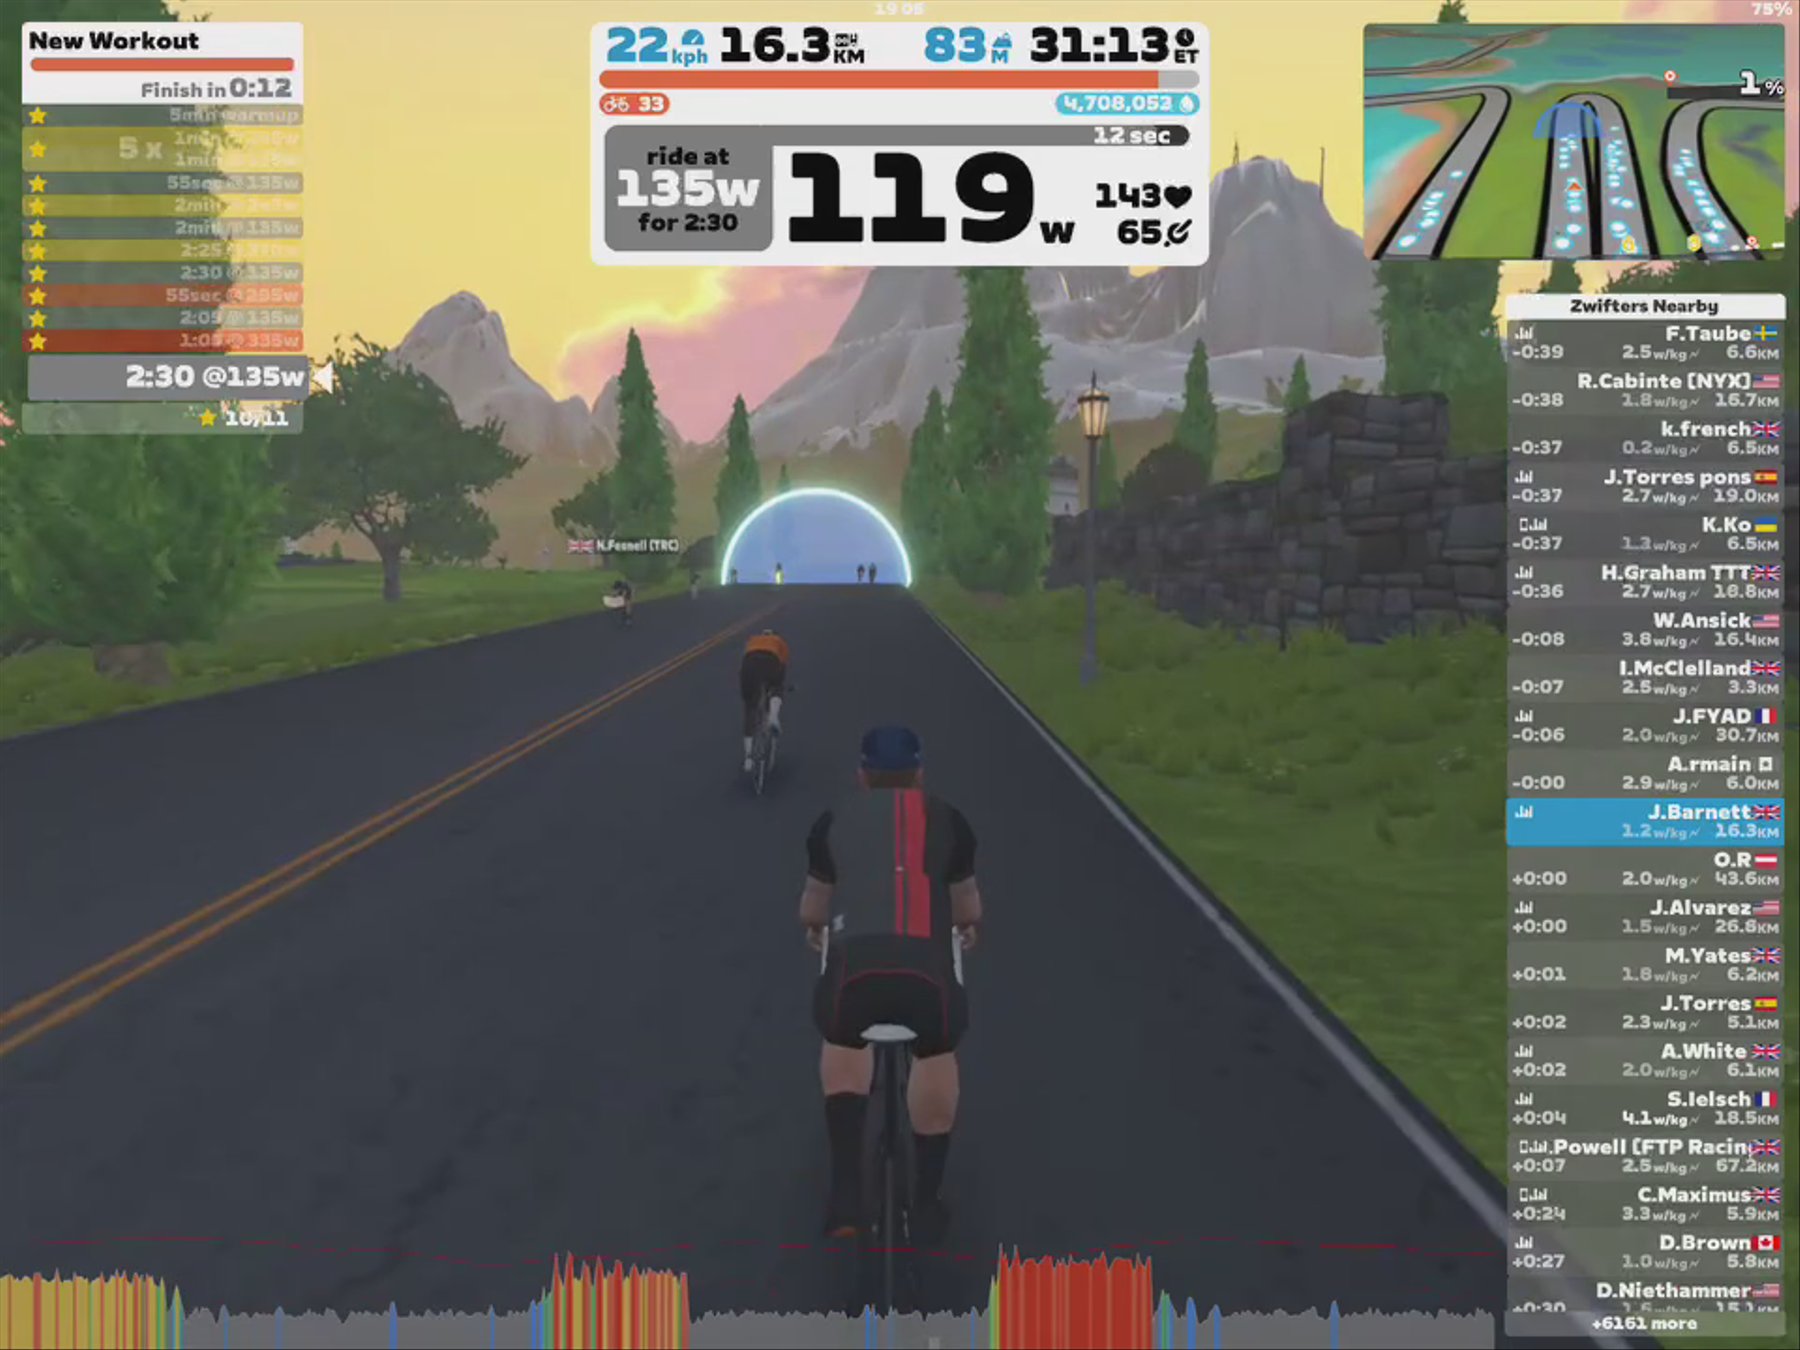 Zwift - New Workout in Watopia